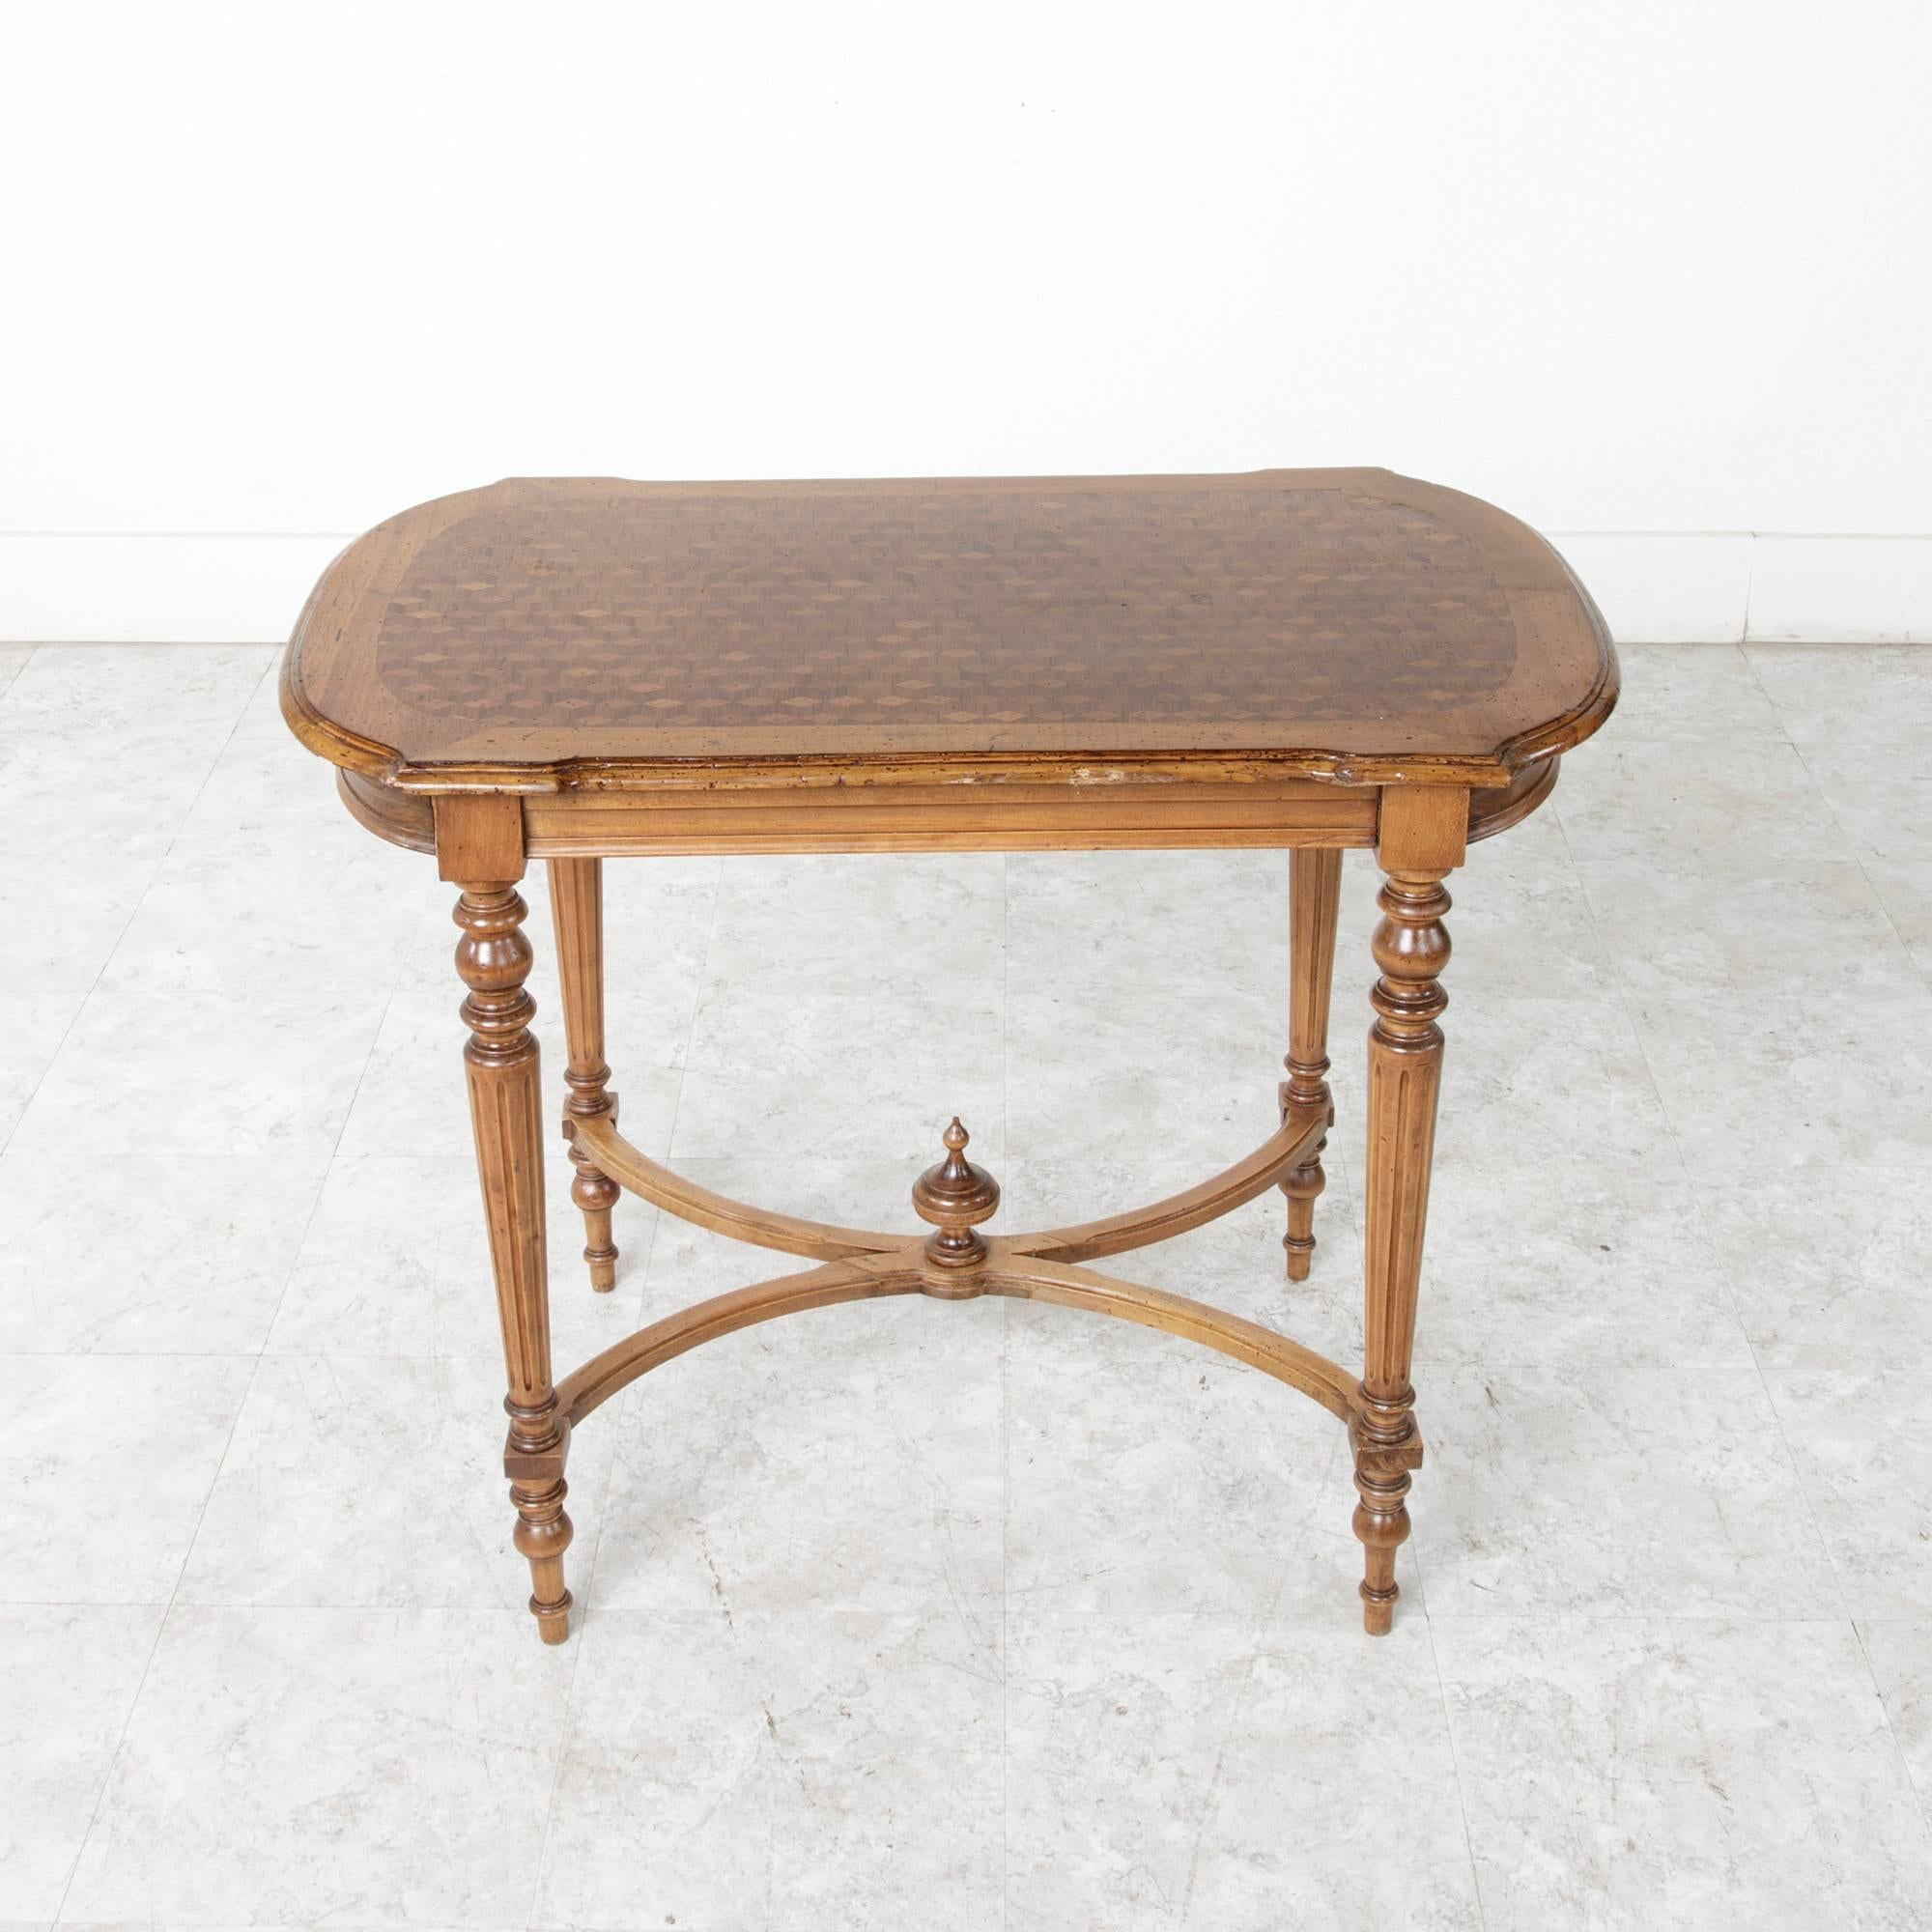 An elegant geometric diamond pattern created from inlaid blond mahogany gives the top of this writing desk great interest. Its simple beveled apron allows the mahogany wood grain to take prominence and leads to tapered, fluted legs with a lower